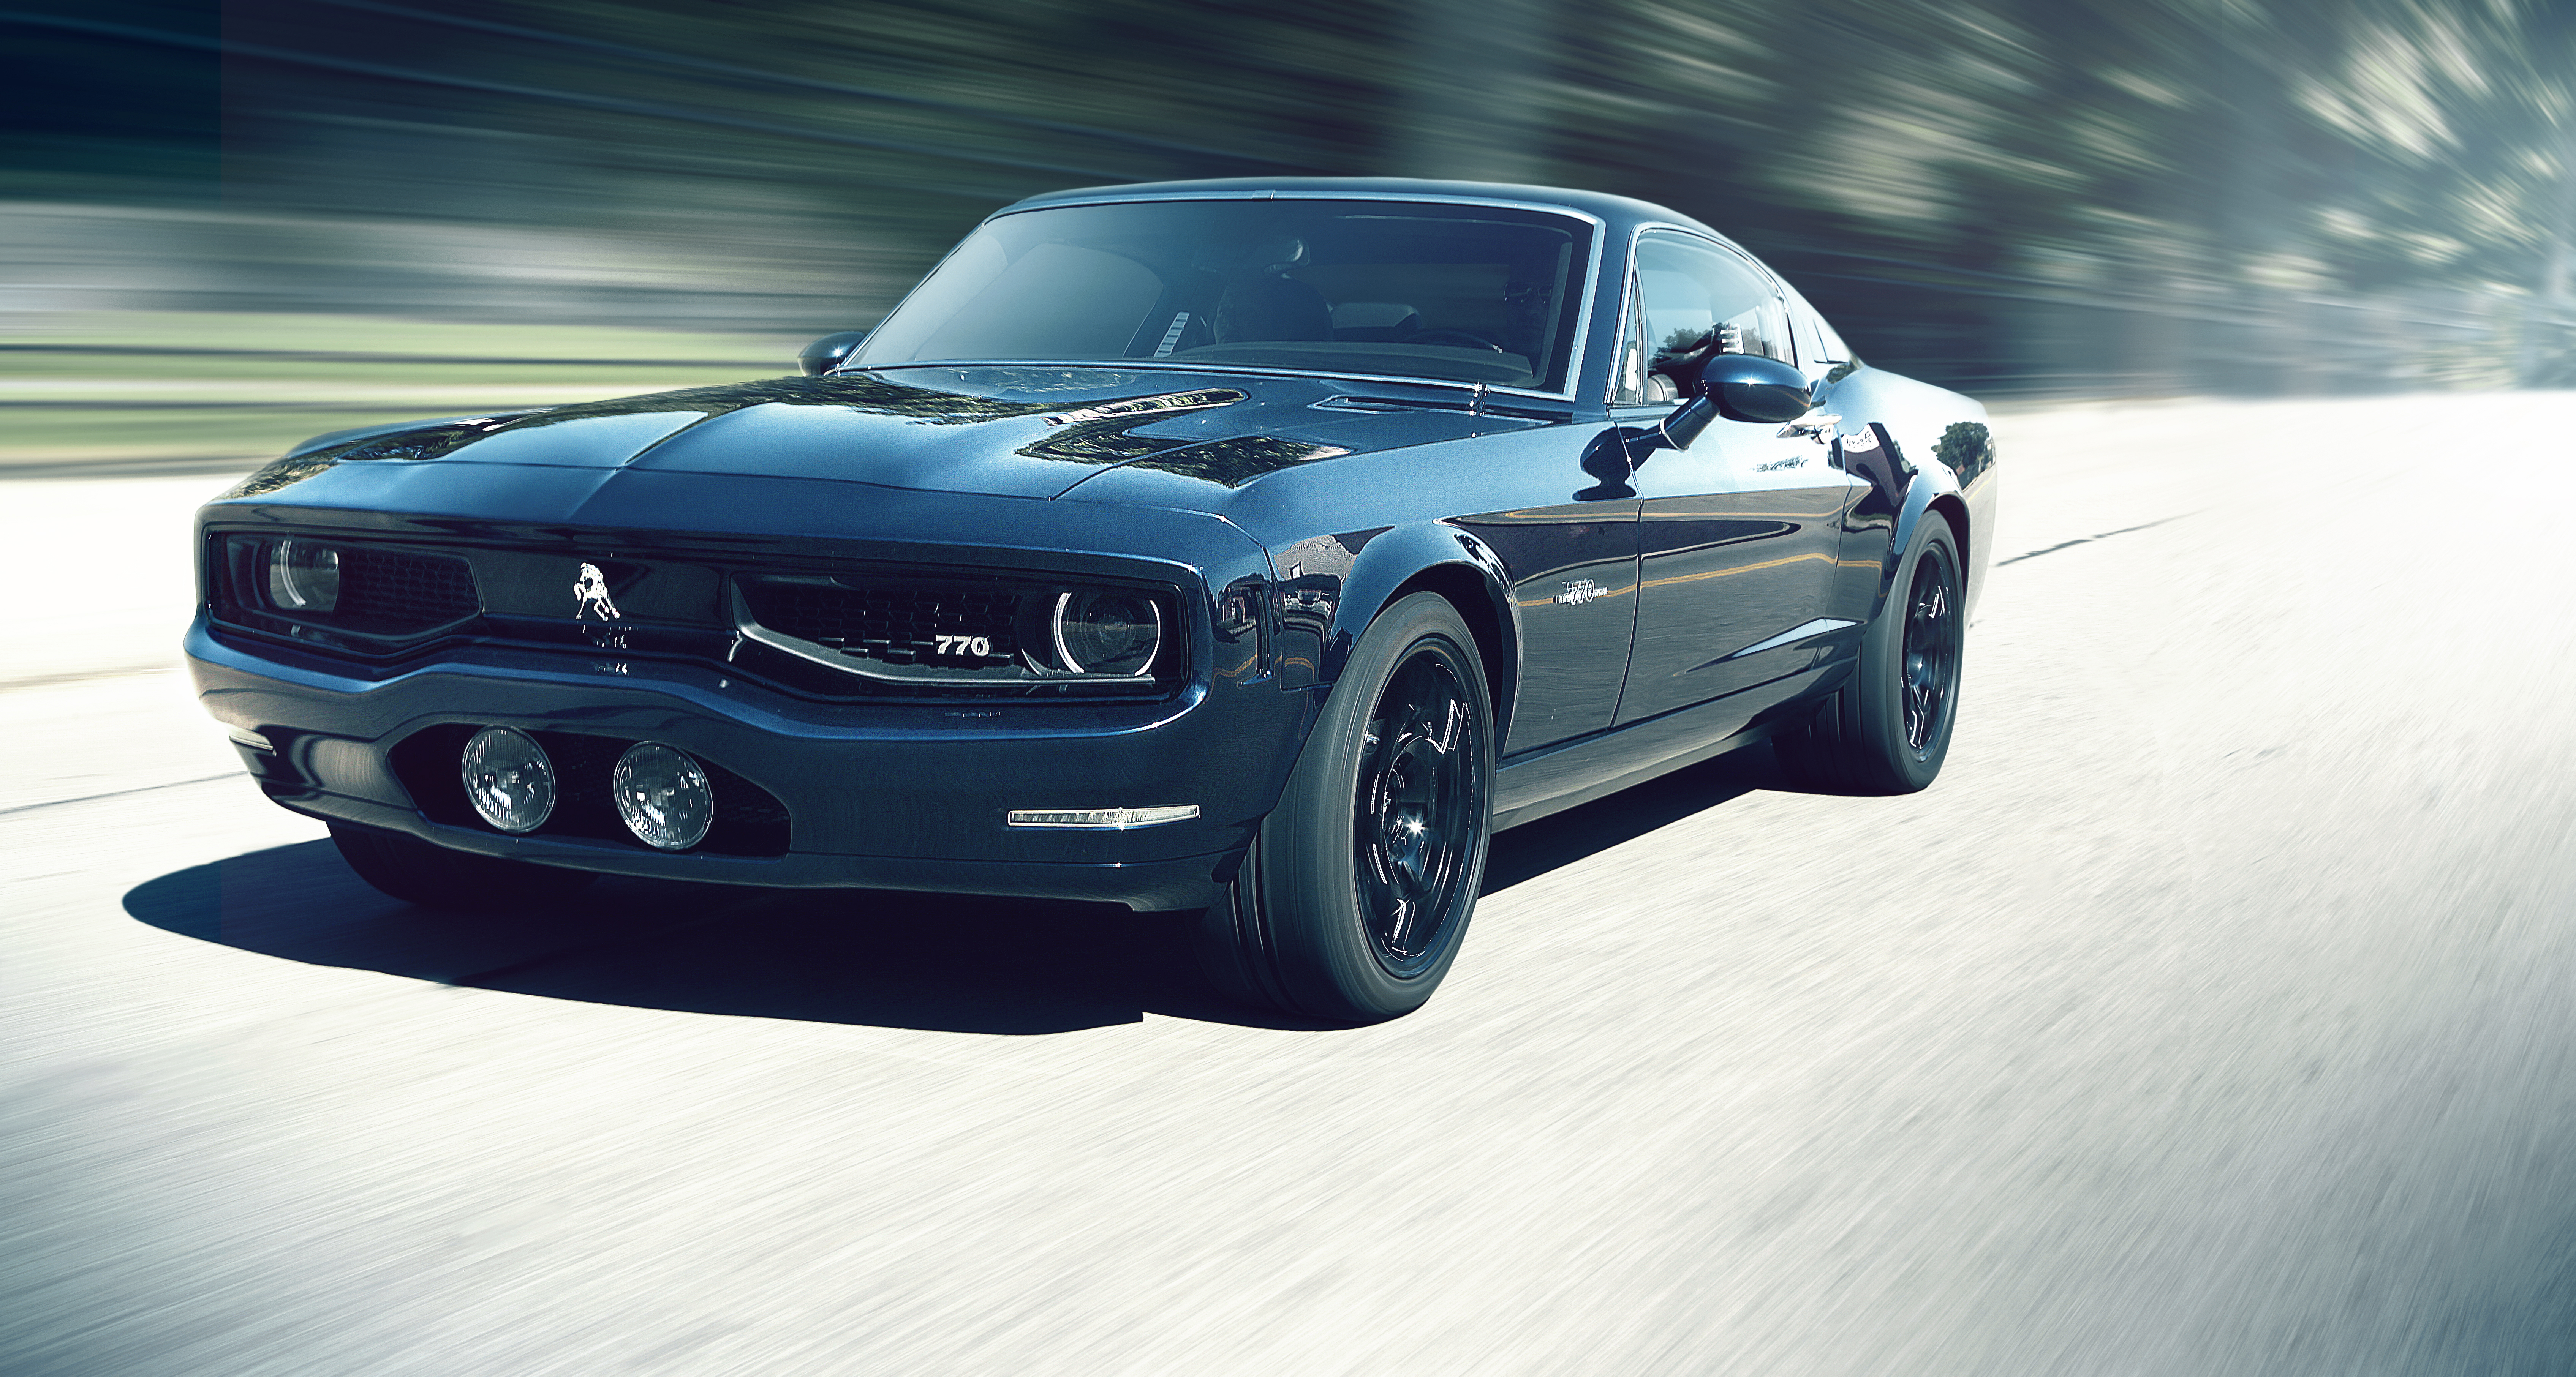 129454 download wallpaper cars, traffic, movement, 2014, equus bass 770 screensavers and pictures for free